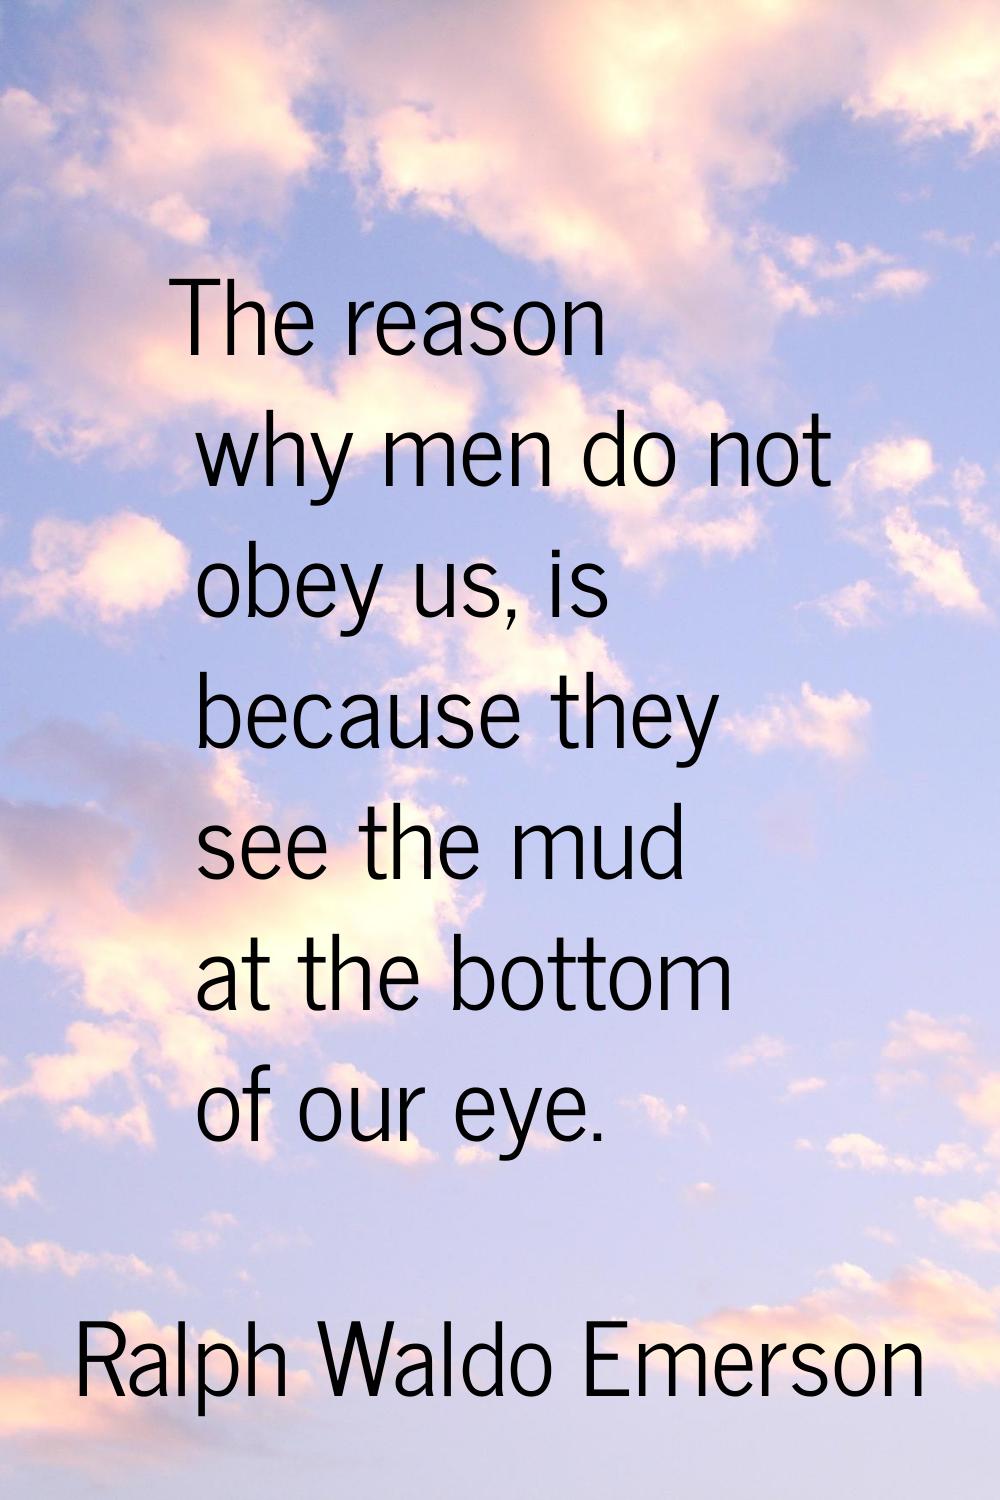 The reason why men do not obey us, is because they see the mud at the bottom of our eye.